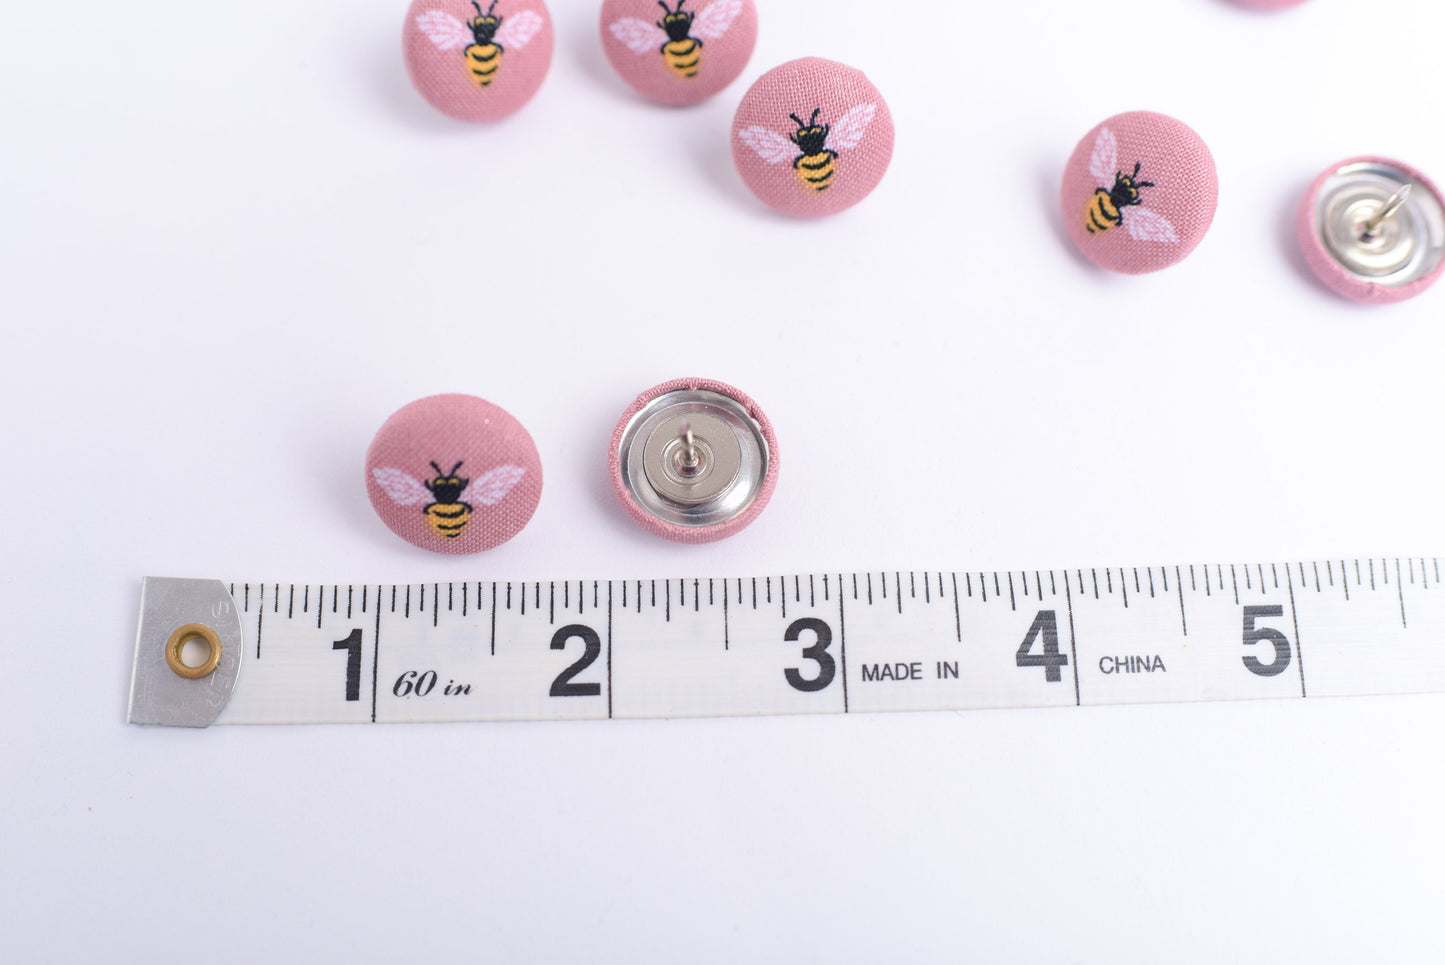 Pink Honey Bee Fabric Button Push Pins- Set of 10